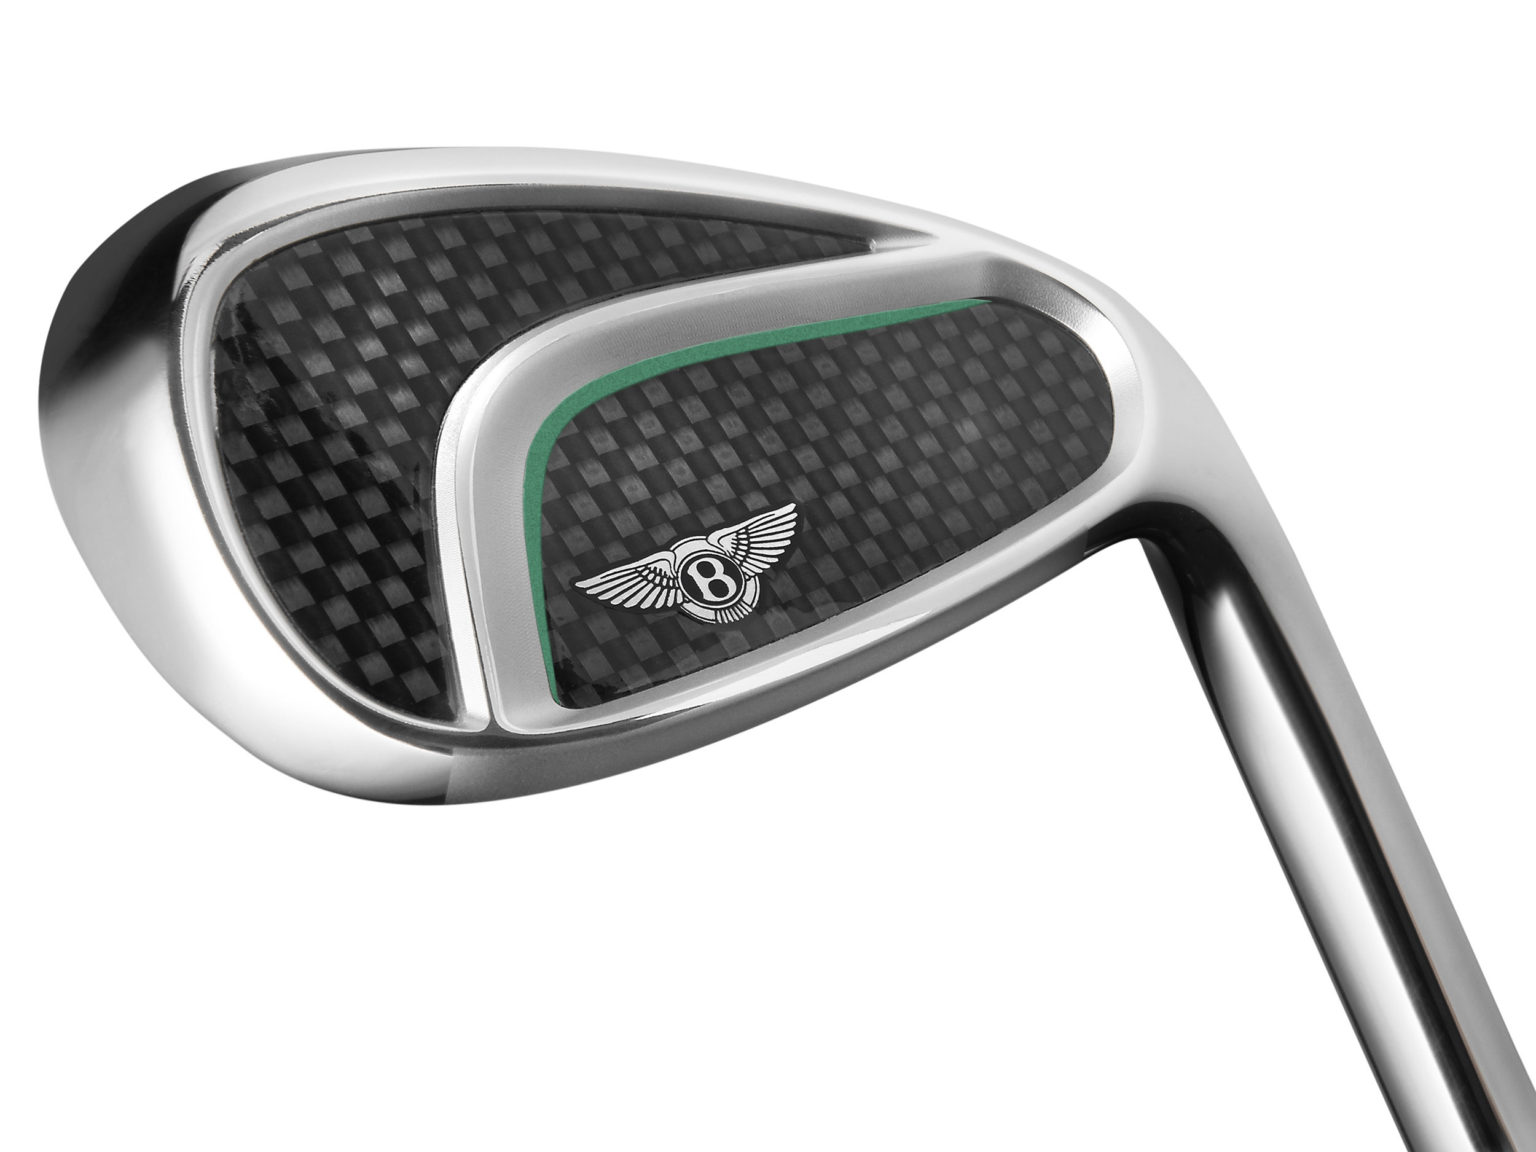 Golf fans who also love Bentley may want to invest in a new set of uniquely engineered clubs.